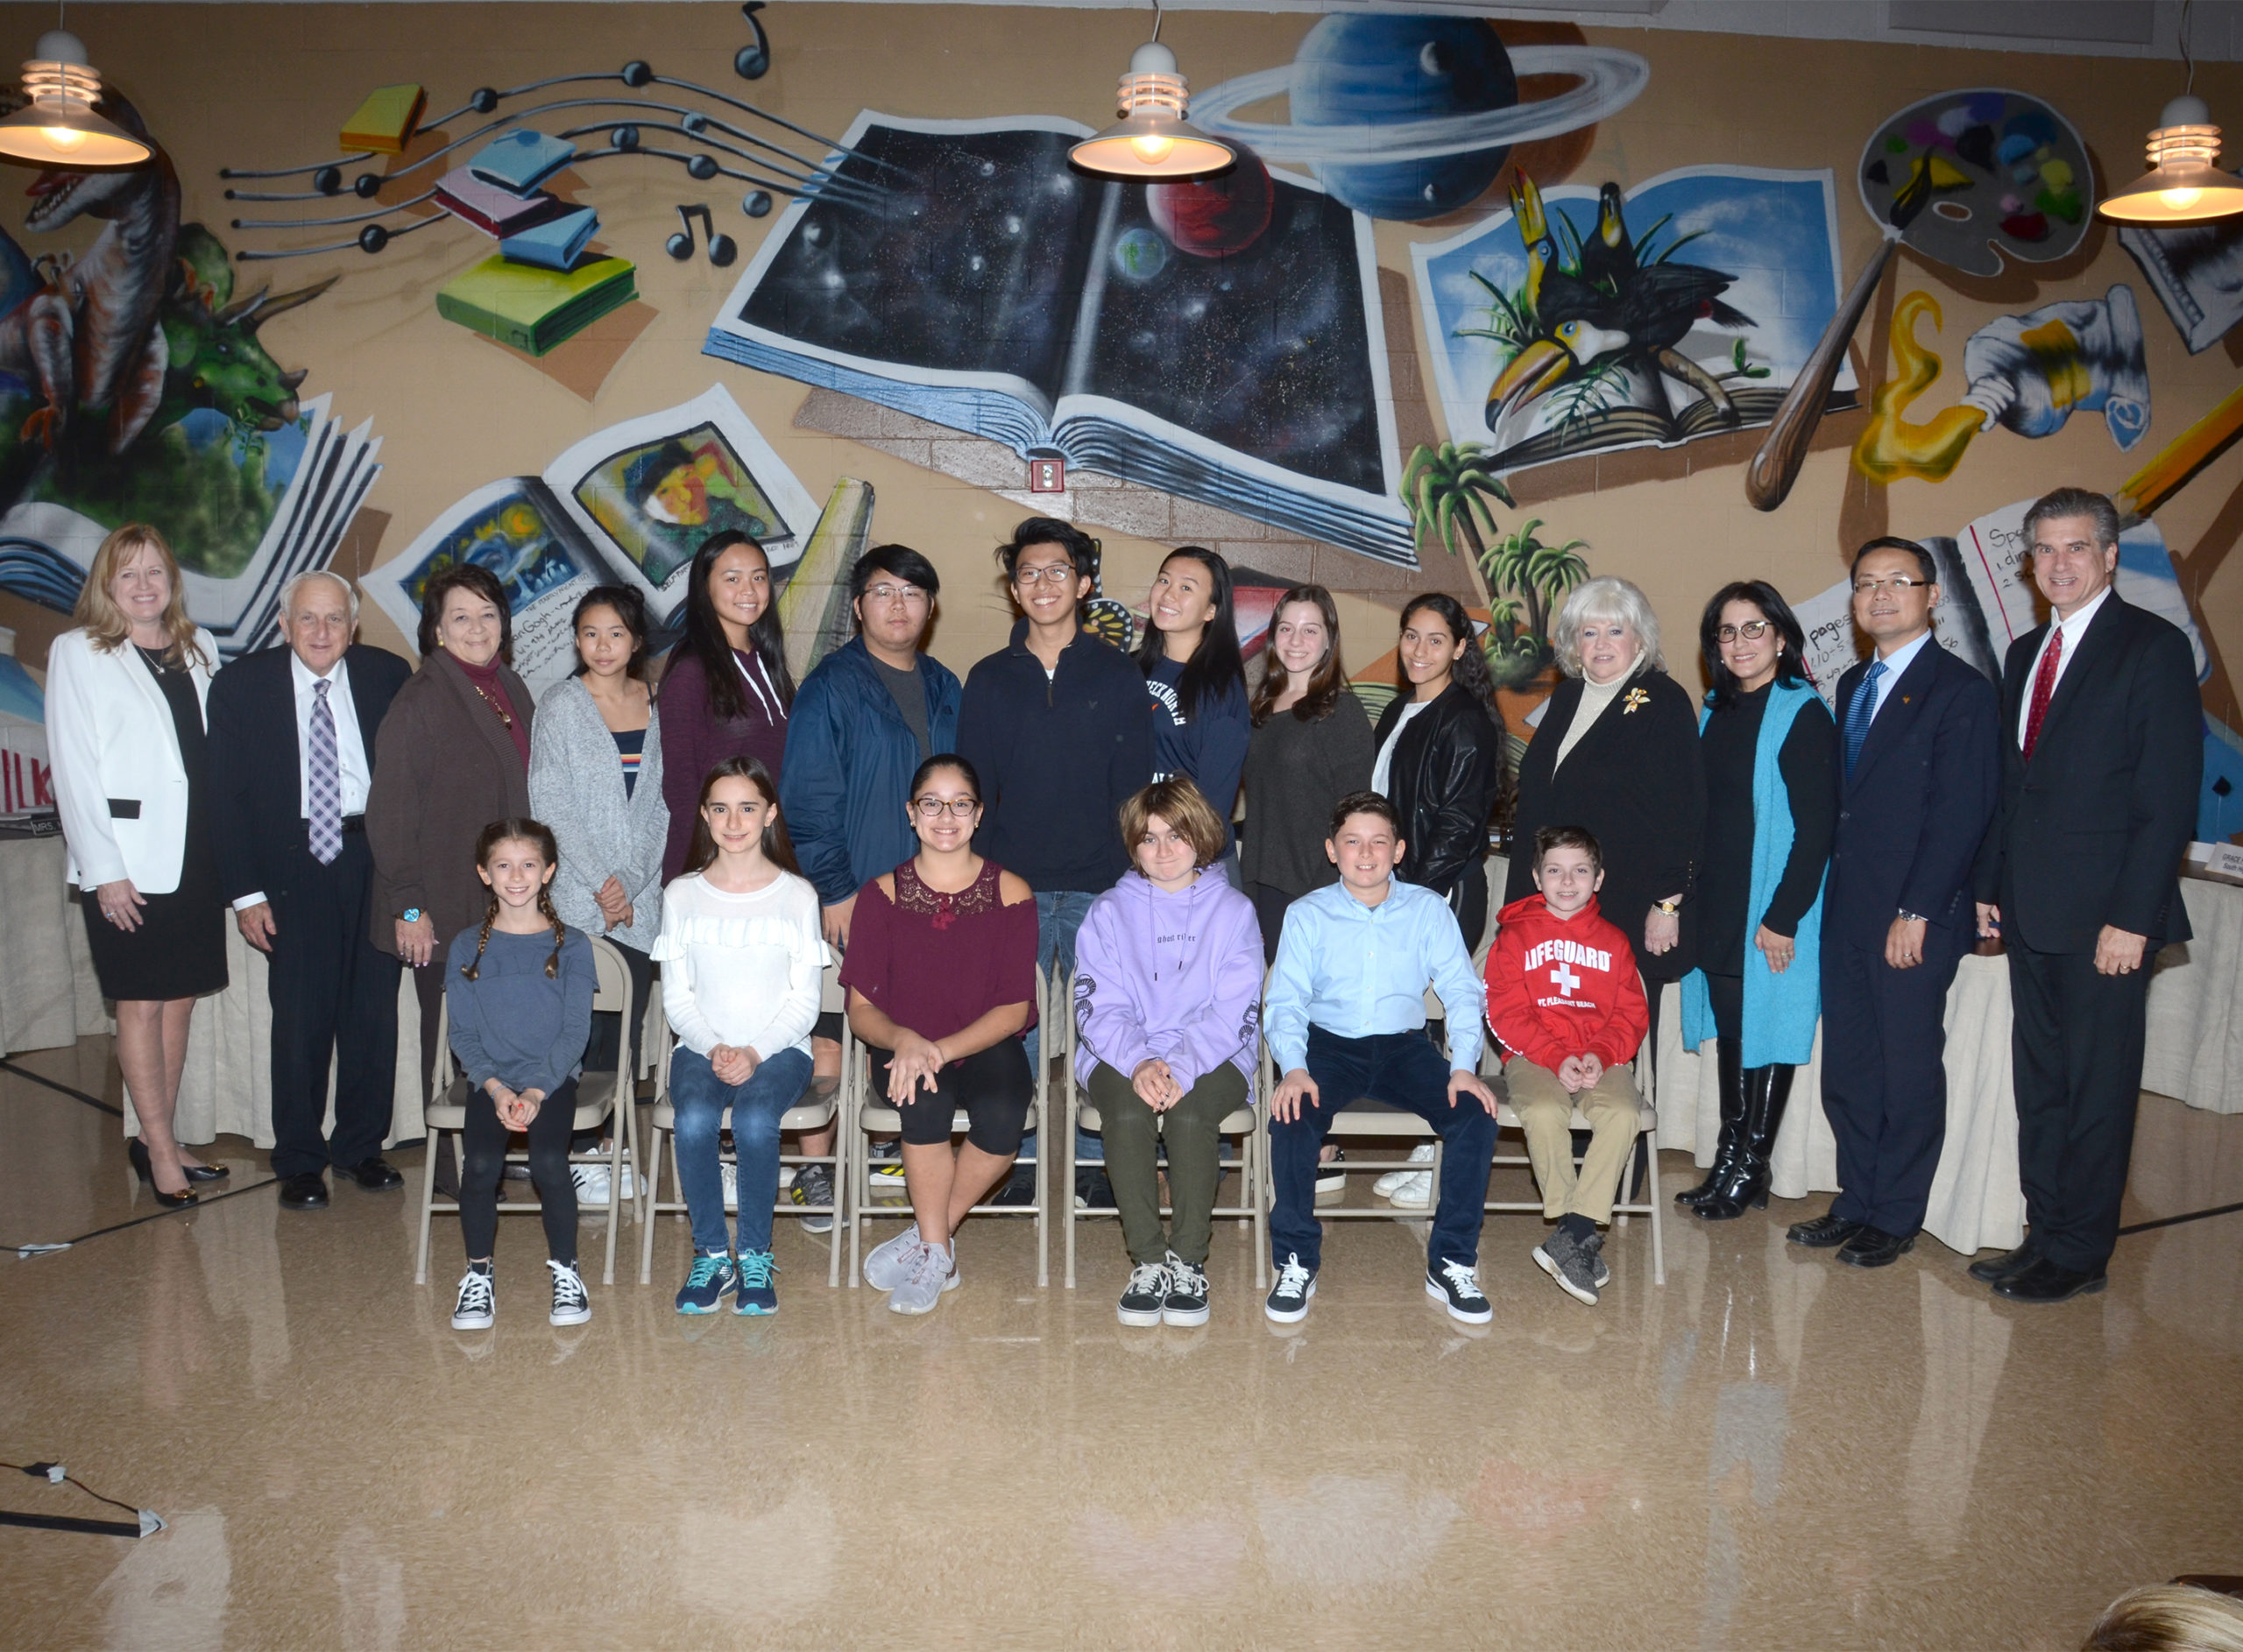 Board of Education student delegates with Board of Education members President Barbara Berkowitz, Vice President Donald Ashkenase, and Trustees Donna Peirez, Rebecca Sassouni, and Jeffrey Shi, along with Superintendent Teresa Prendergast, and Assistant Superintendent Stephen Lando. (Photo by Irwin Mendlinger)